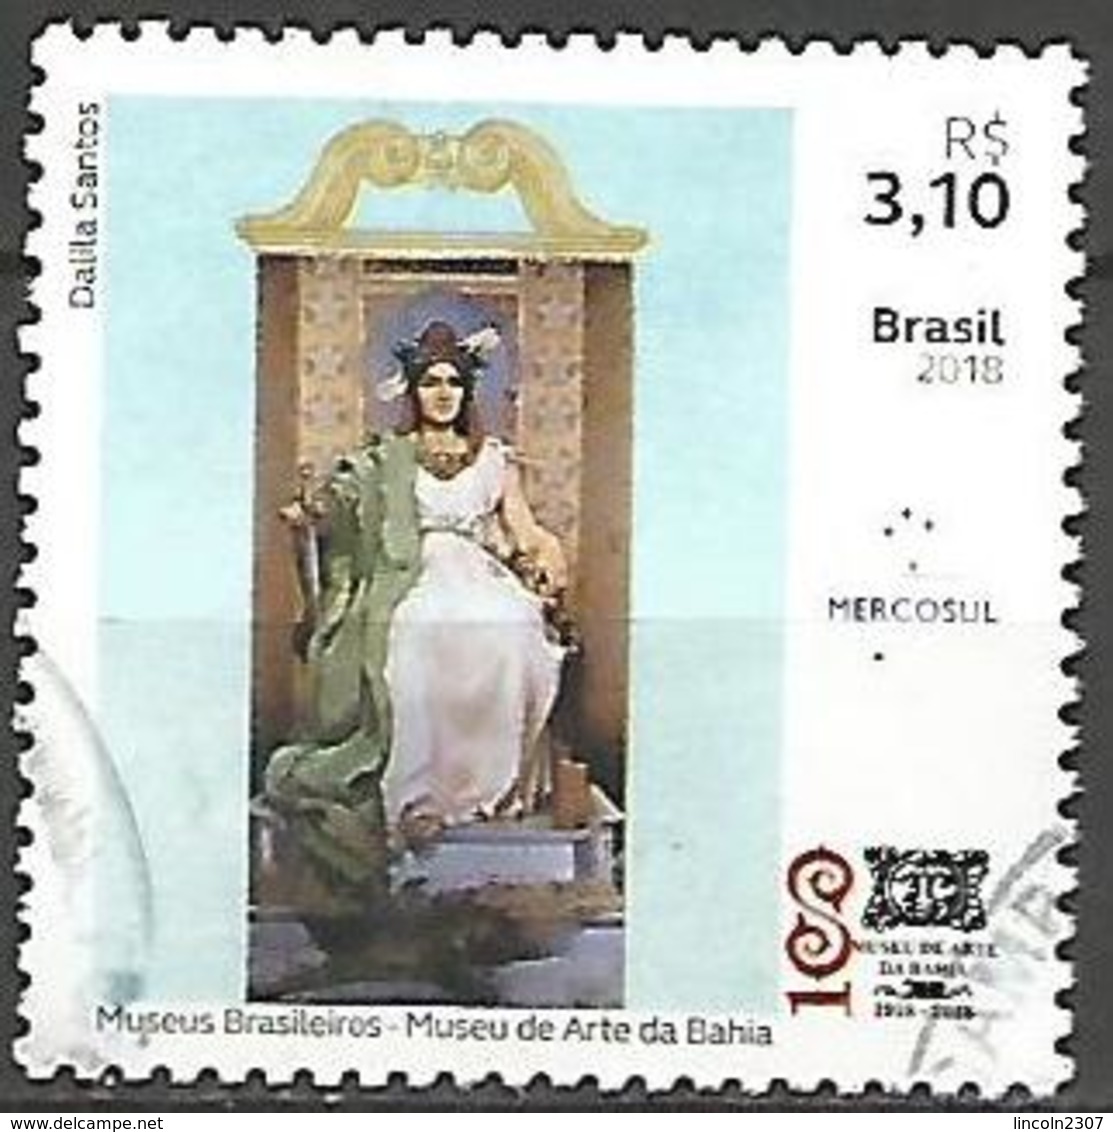 LSJP BRAZIL (5) THE MUSEUM OF ARTS YES BAHIA MERCOSUL 2018 - Used Stamps